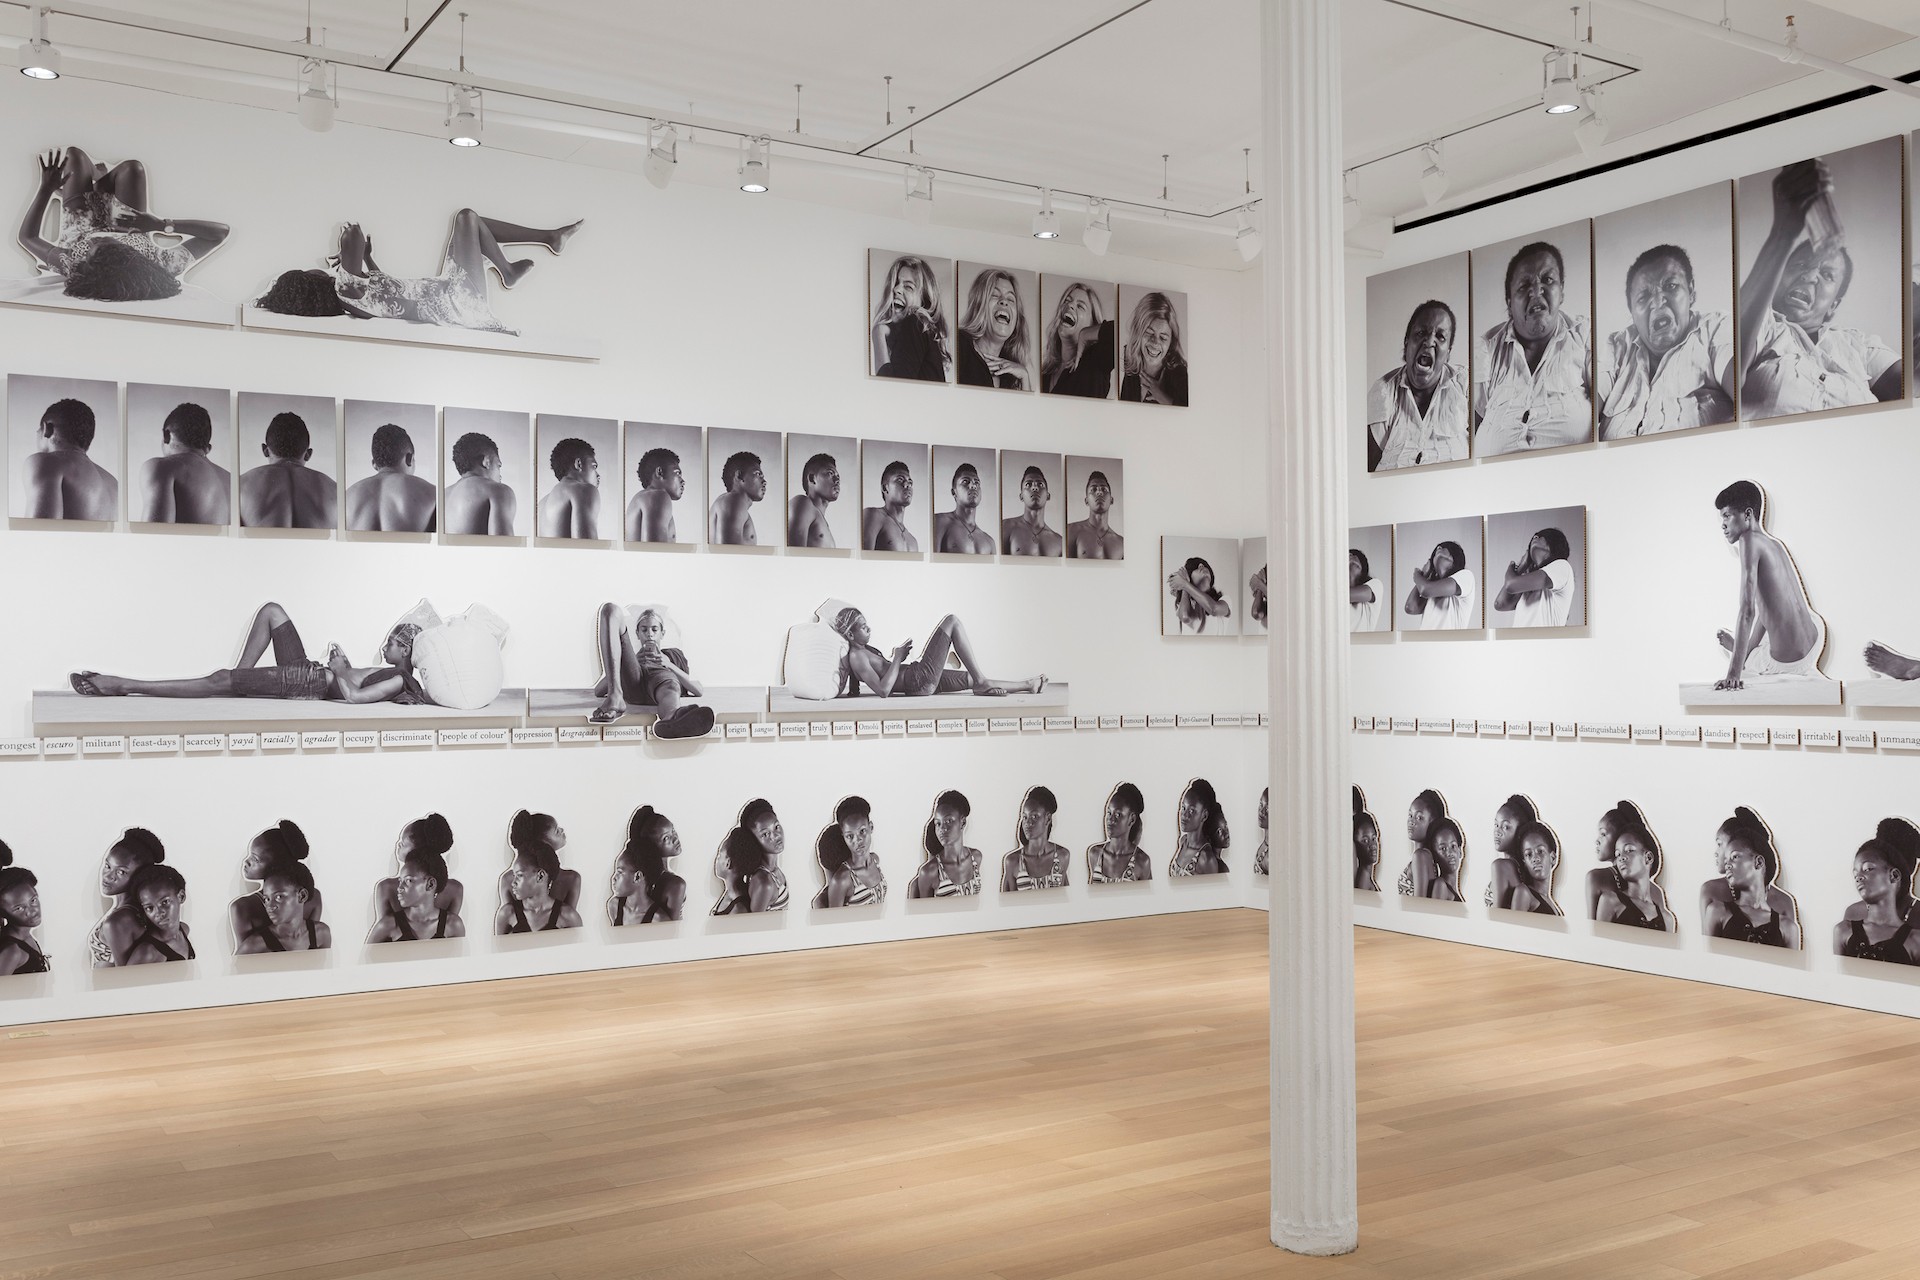 An exhibition space with white walls and light wooden floors with many black and white photographs on the wall for Jonathas de Andrade's project called, "Eu, mestiço."